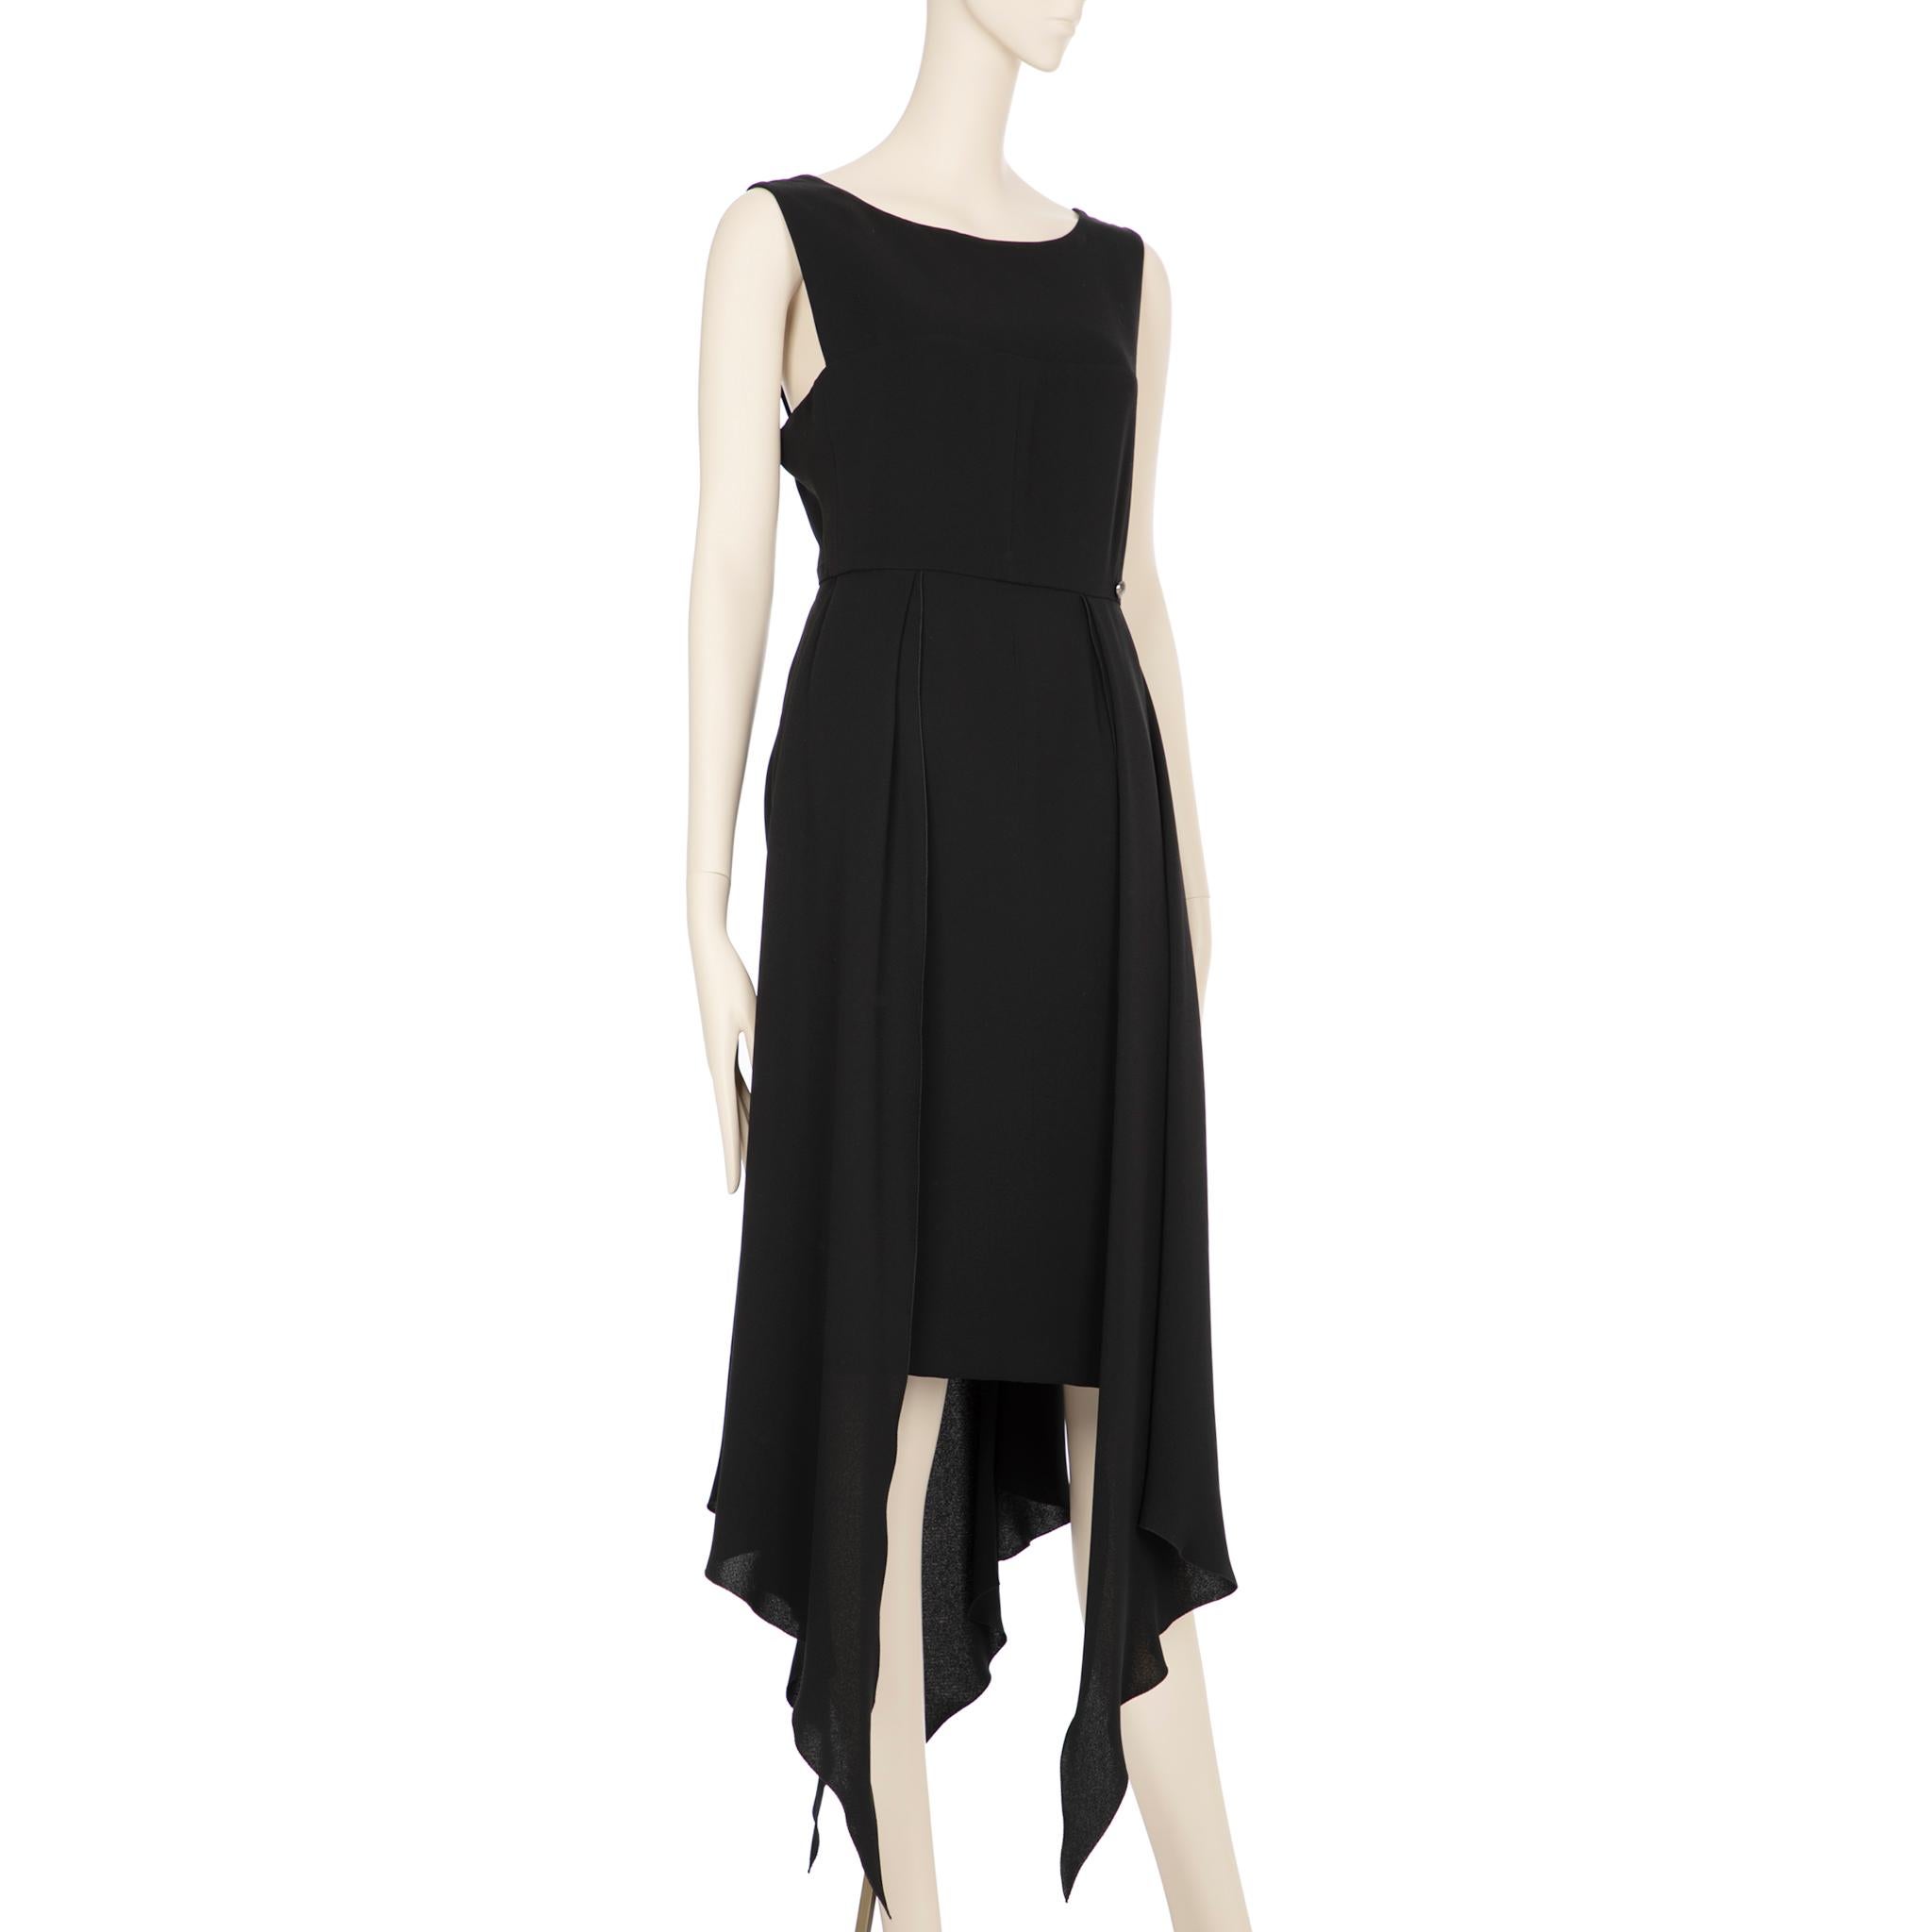 
Brand: Chanel

Product: Slip Dress

Size: 40 Fr

Colour: Black

Material:

Outer: 100% Silk

Lining: 100% Silk

Condition:

Excellent:

The product is in excellent condition, displaying minimal signs of wear. The product has been well-maintained